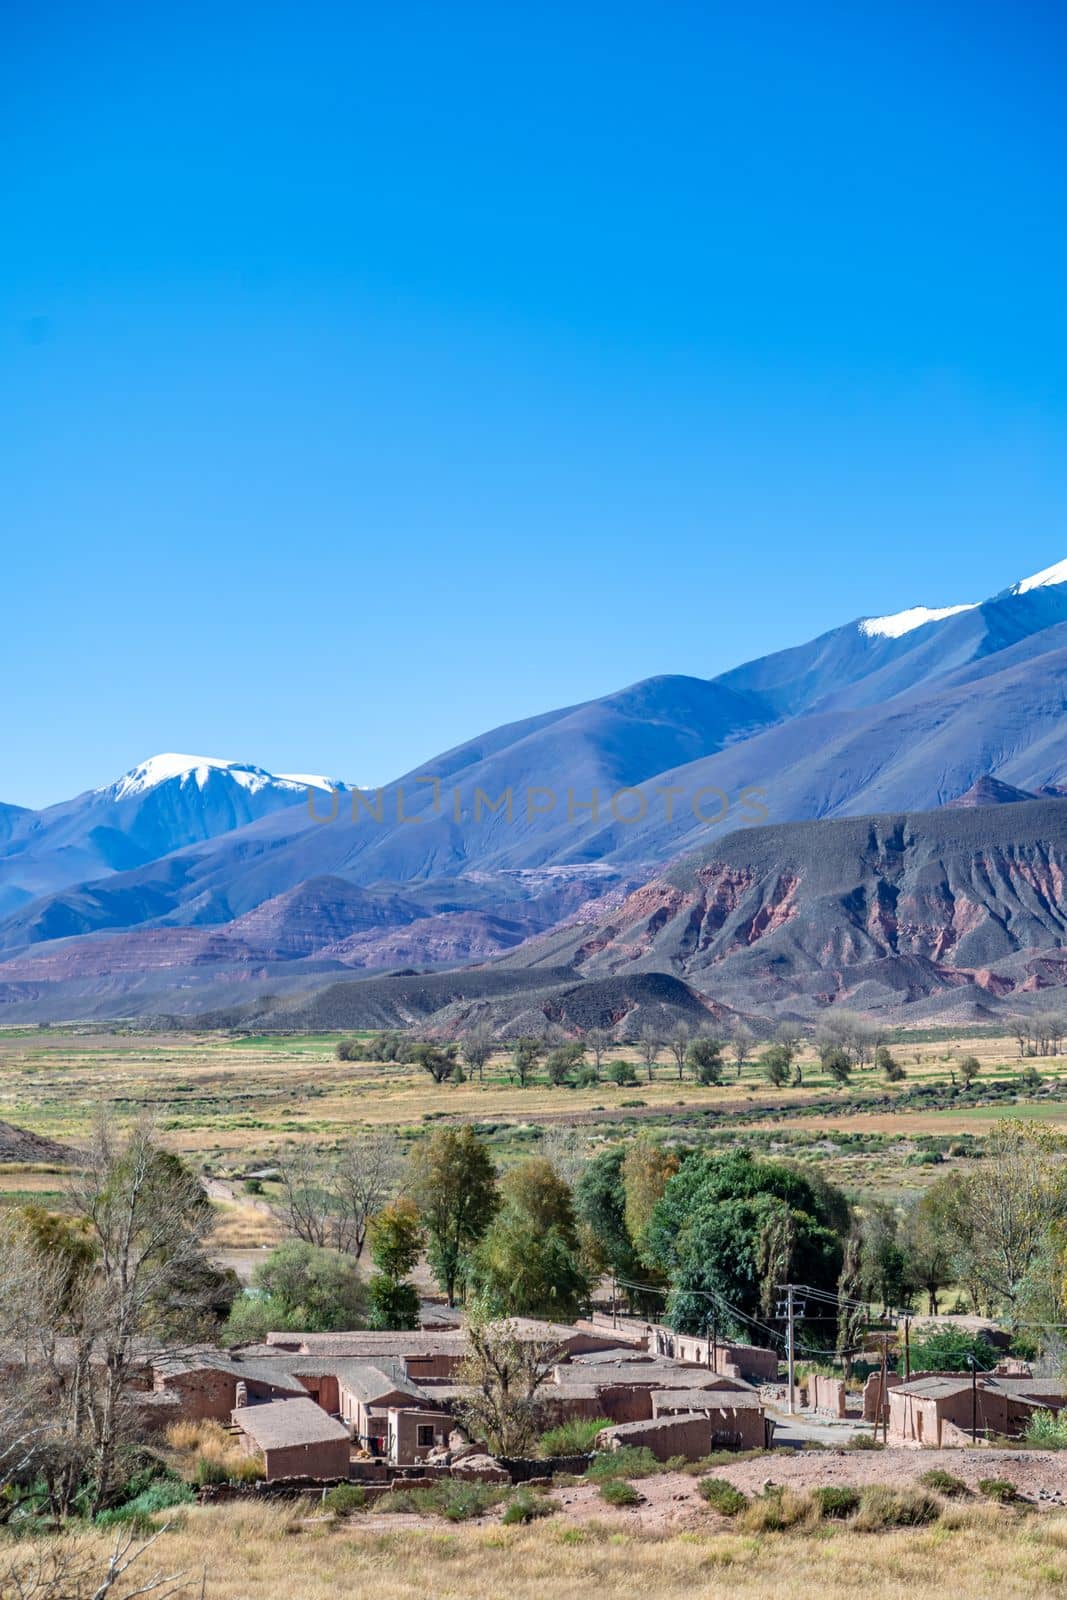 The mountain village of La Poma in the Argentine Andes by Edophoto